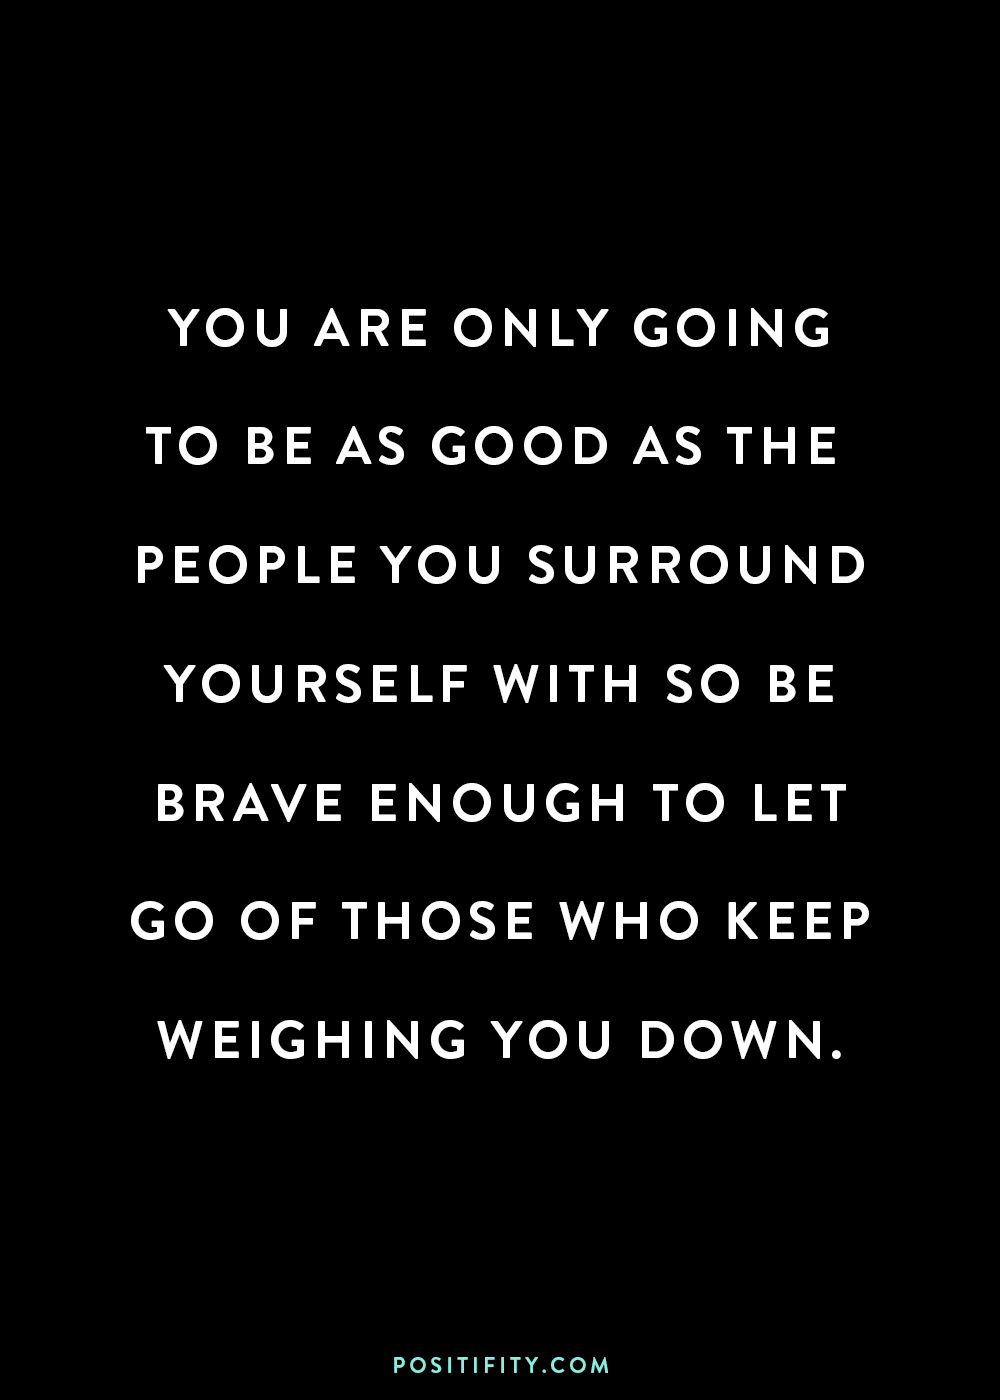 “You are only as good as the people you surround yourself with so be brave enough to let go of those who keep weighing you down.”